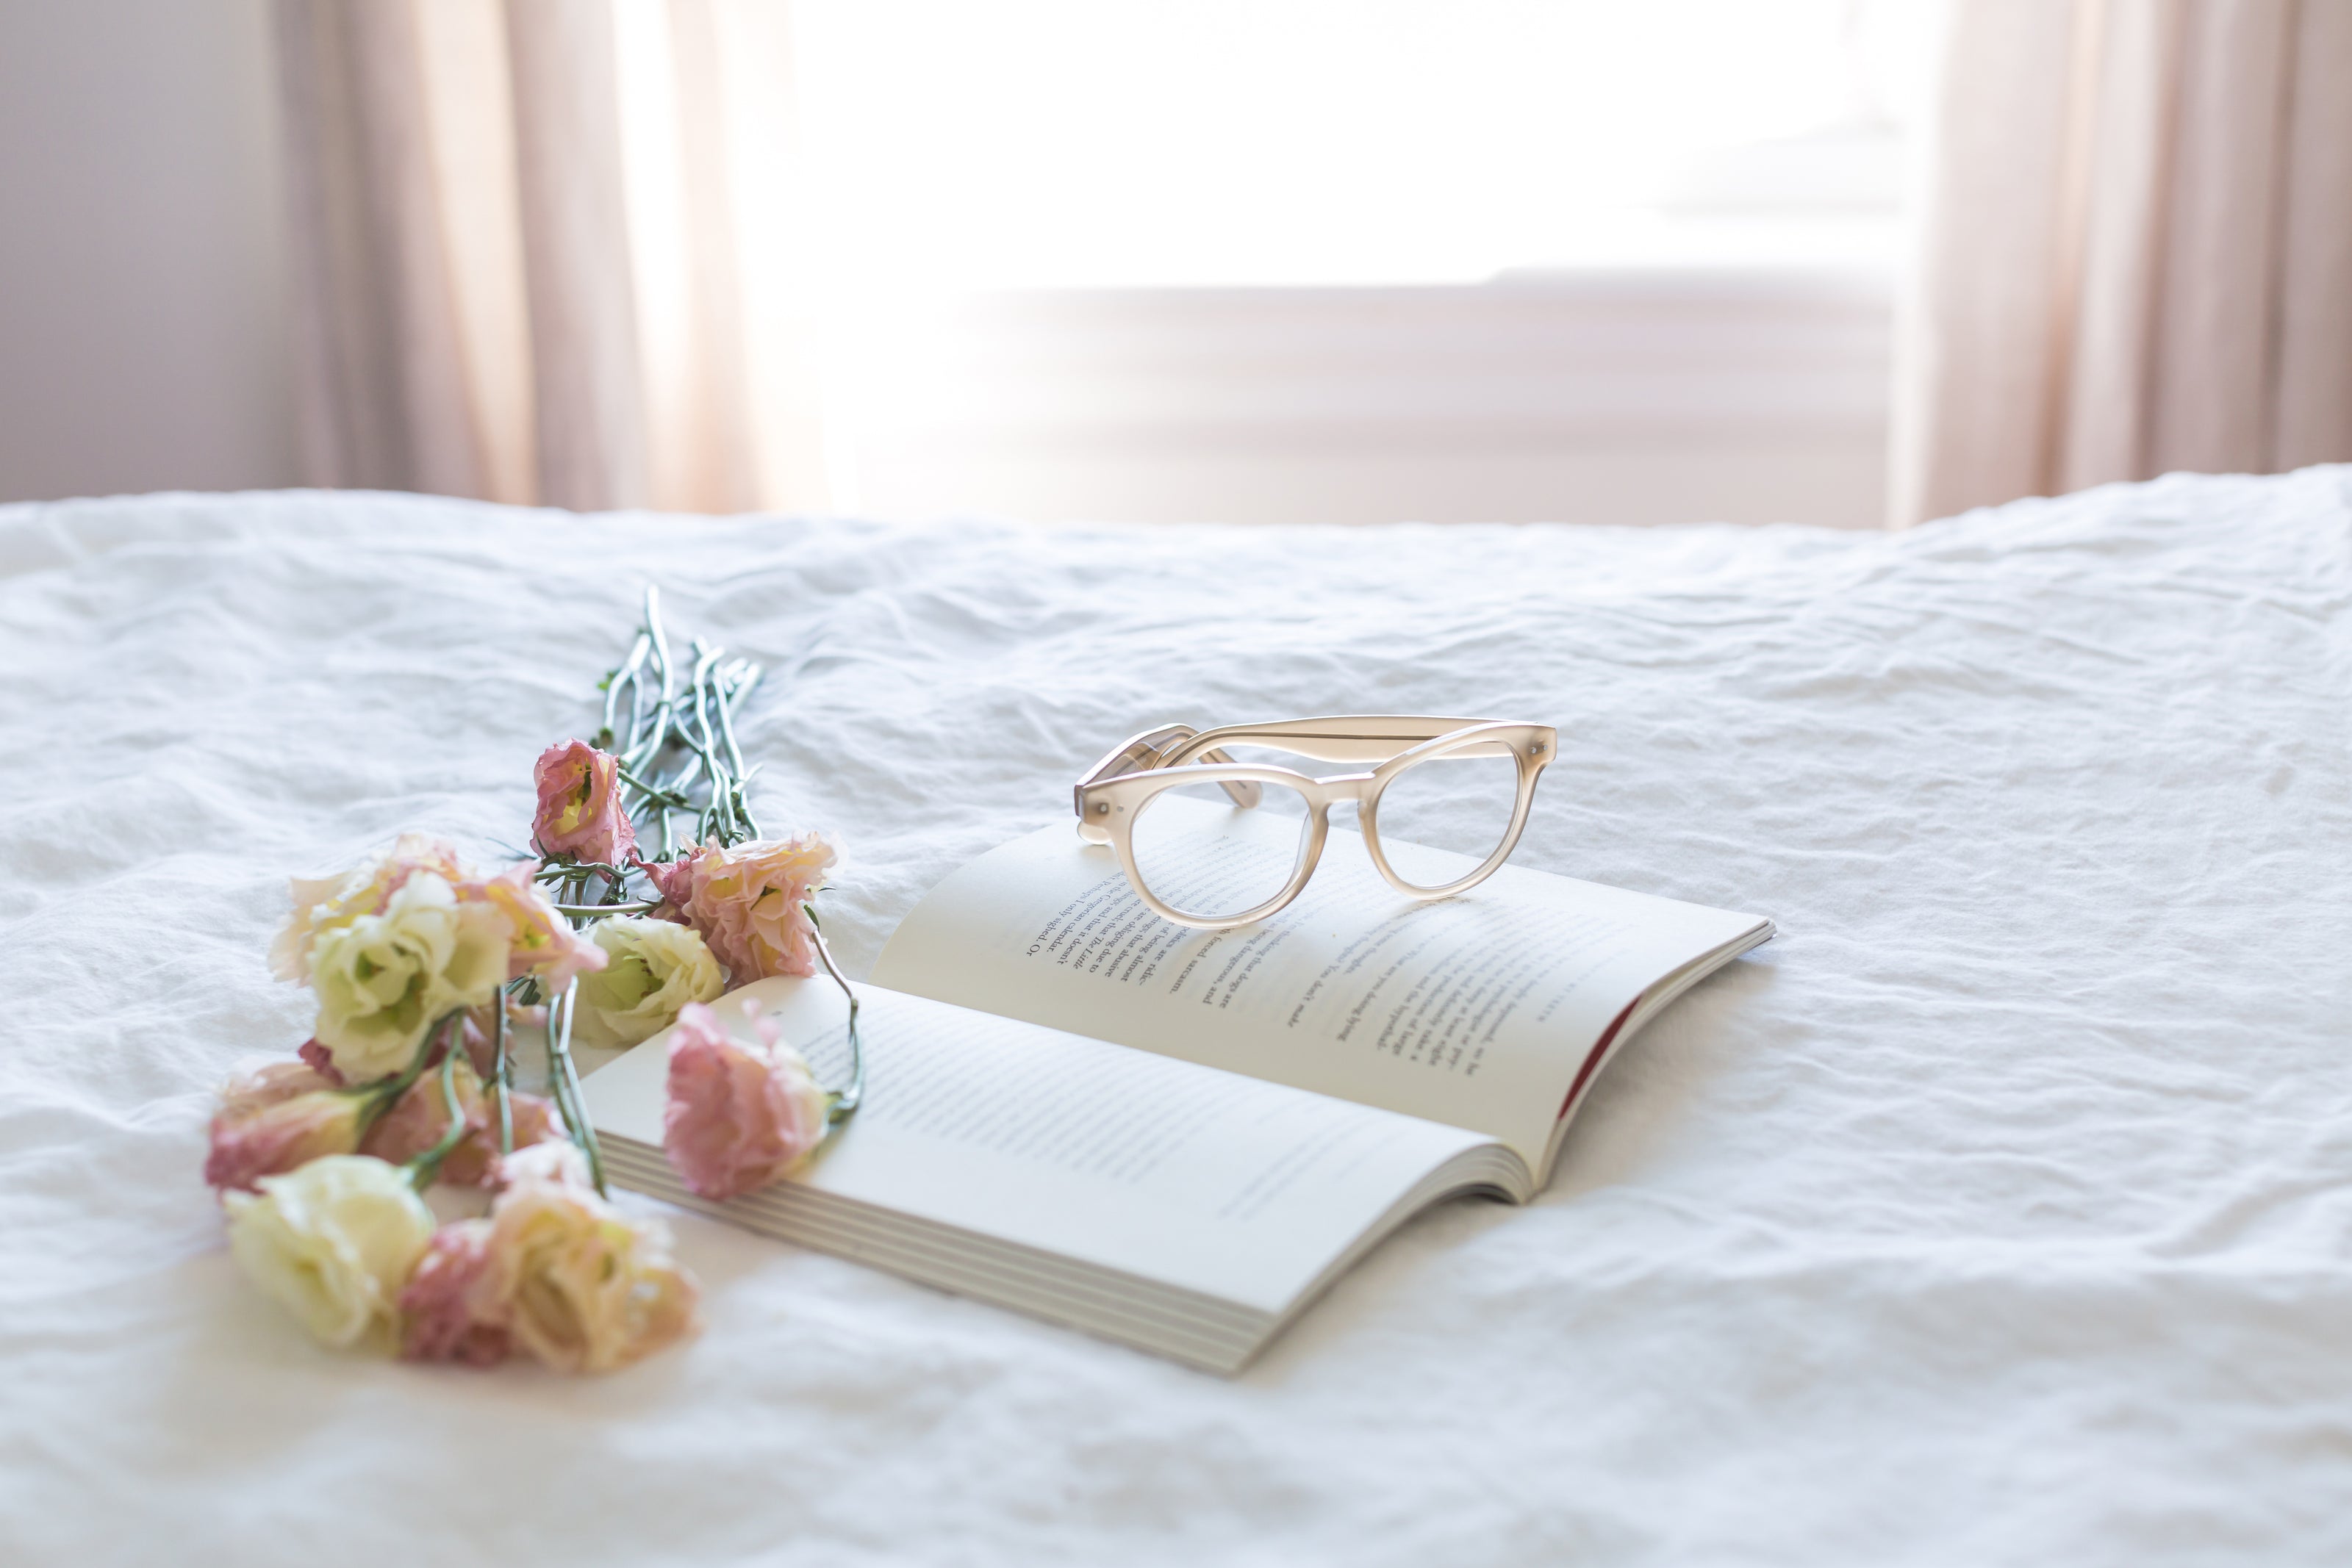 Book, Flowers, and Reading Glasses on a Bed